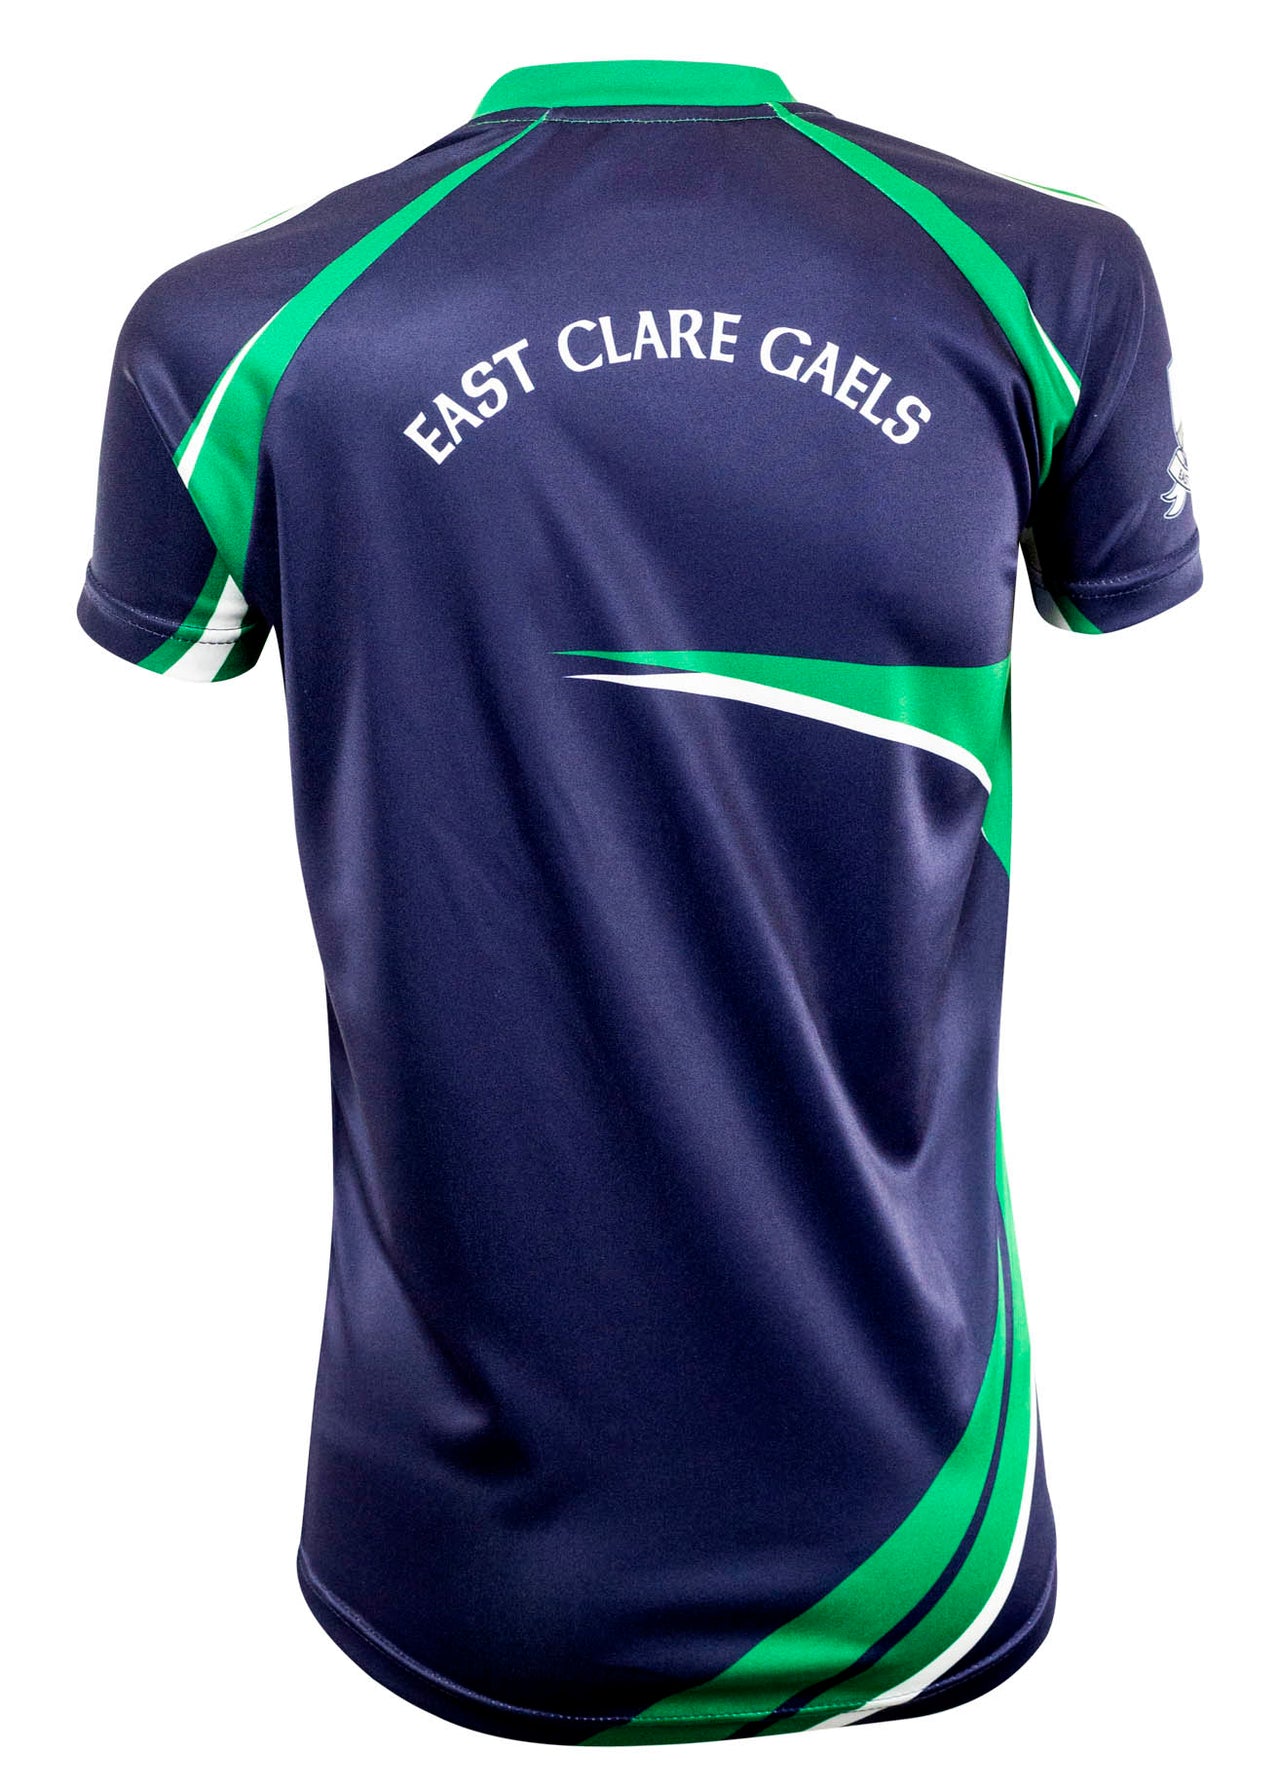 East Clare Gaels Home Jersey Kids